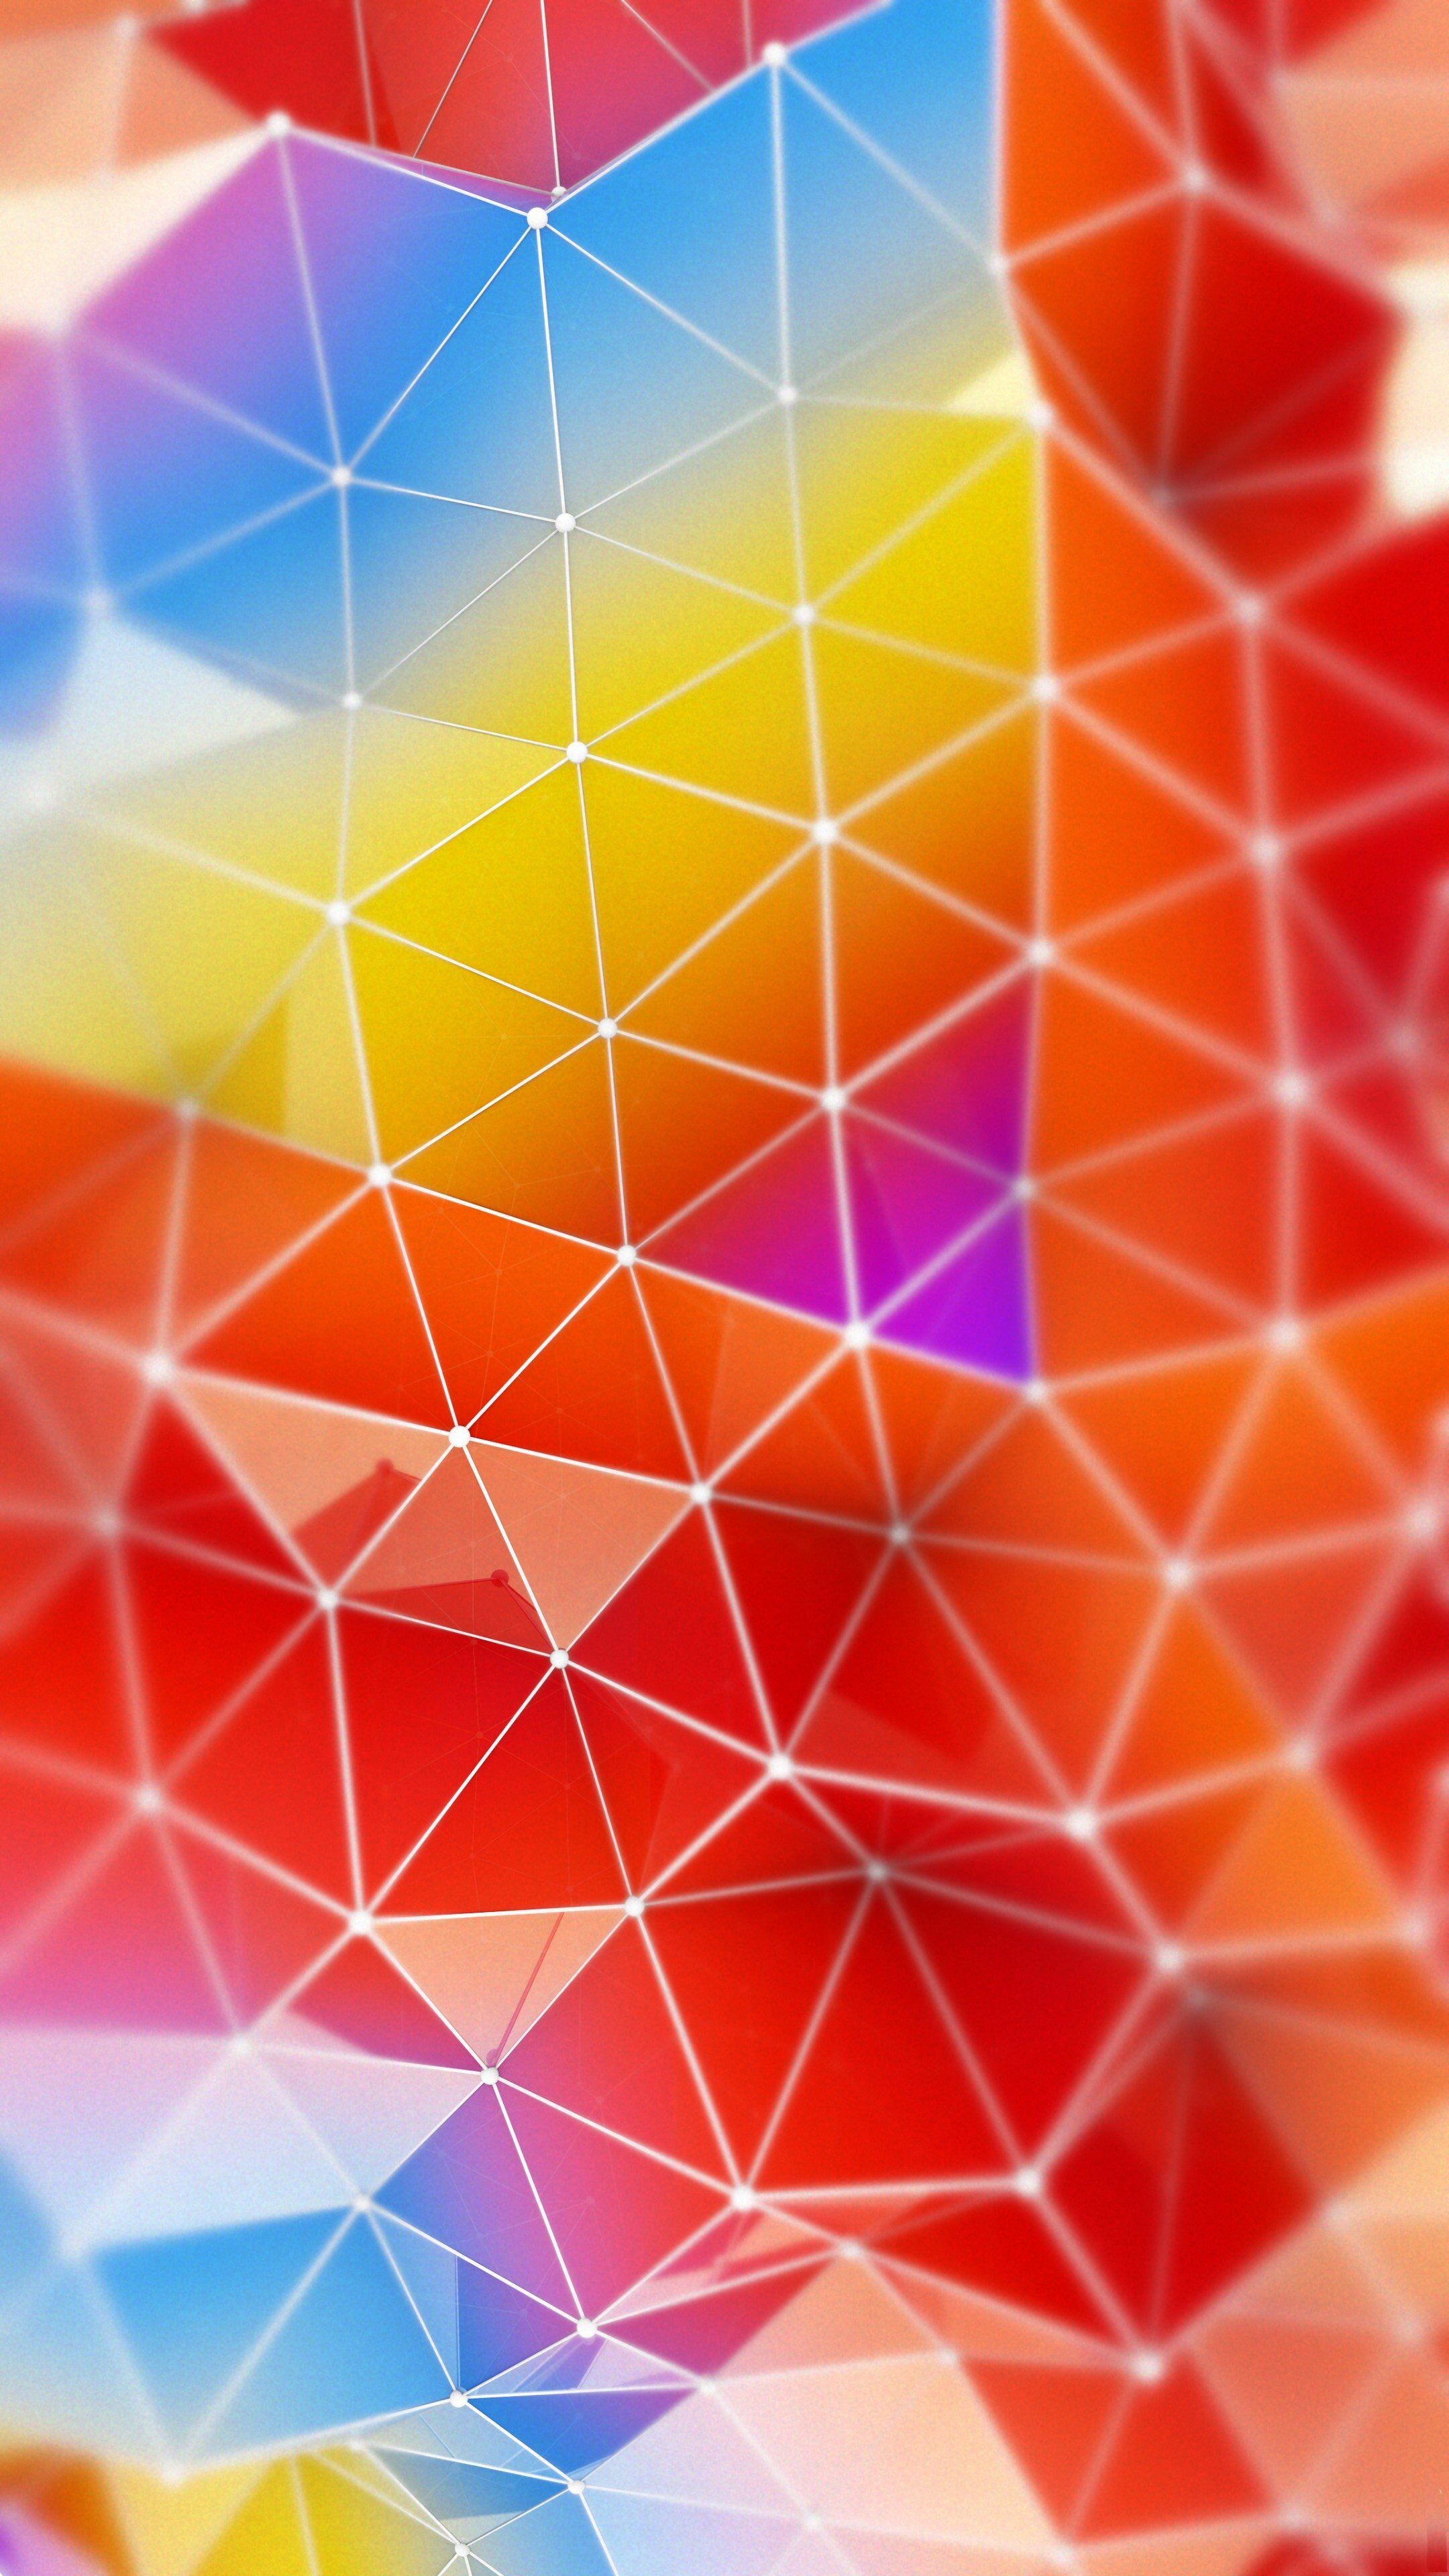 Triangle: Abstract ornament, Hexagons, Heptagons, Octagons. 2160x3840 4K Wallpaper.